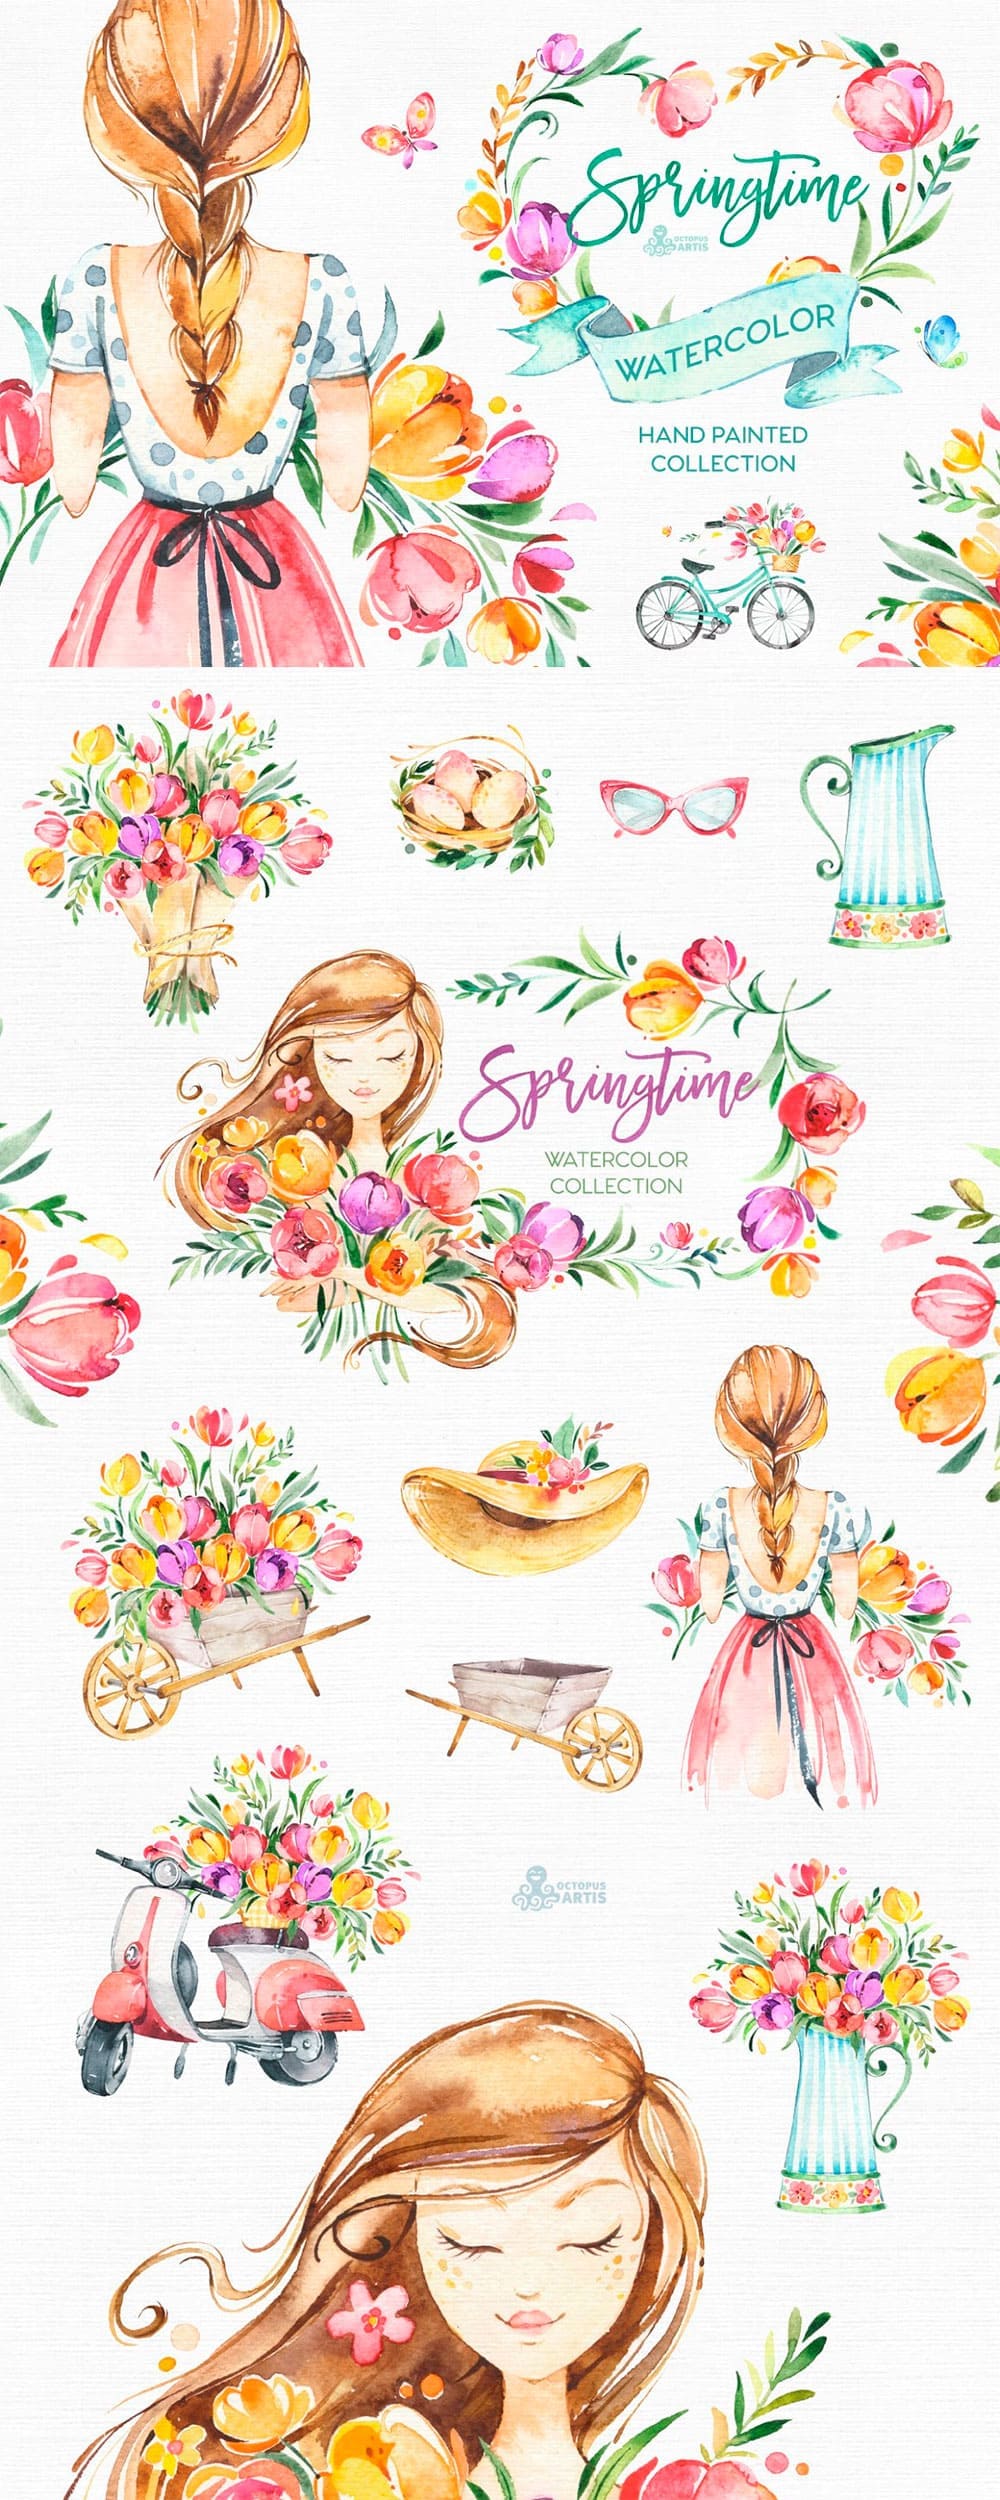 Springtime. watercolor collection, picture for pinterest.